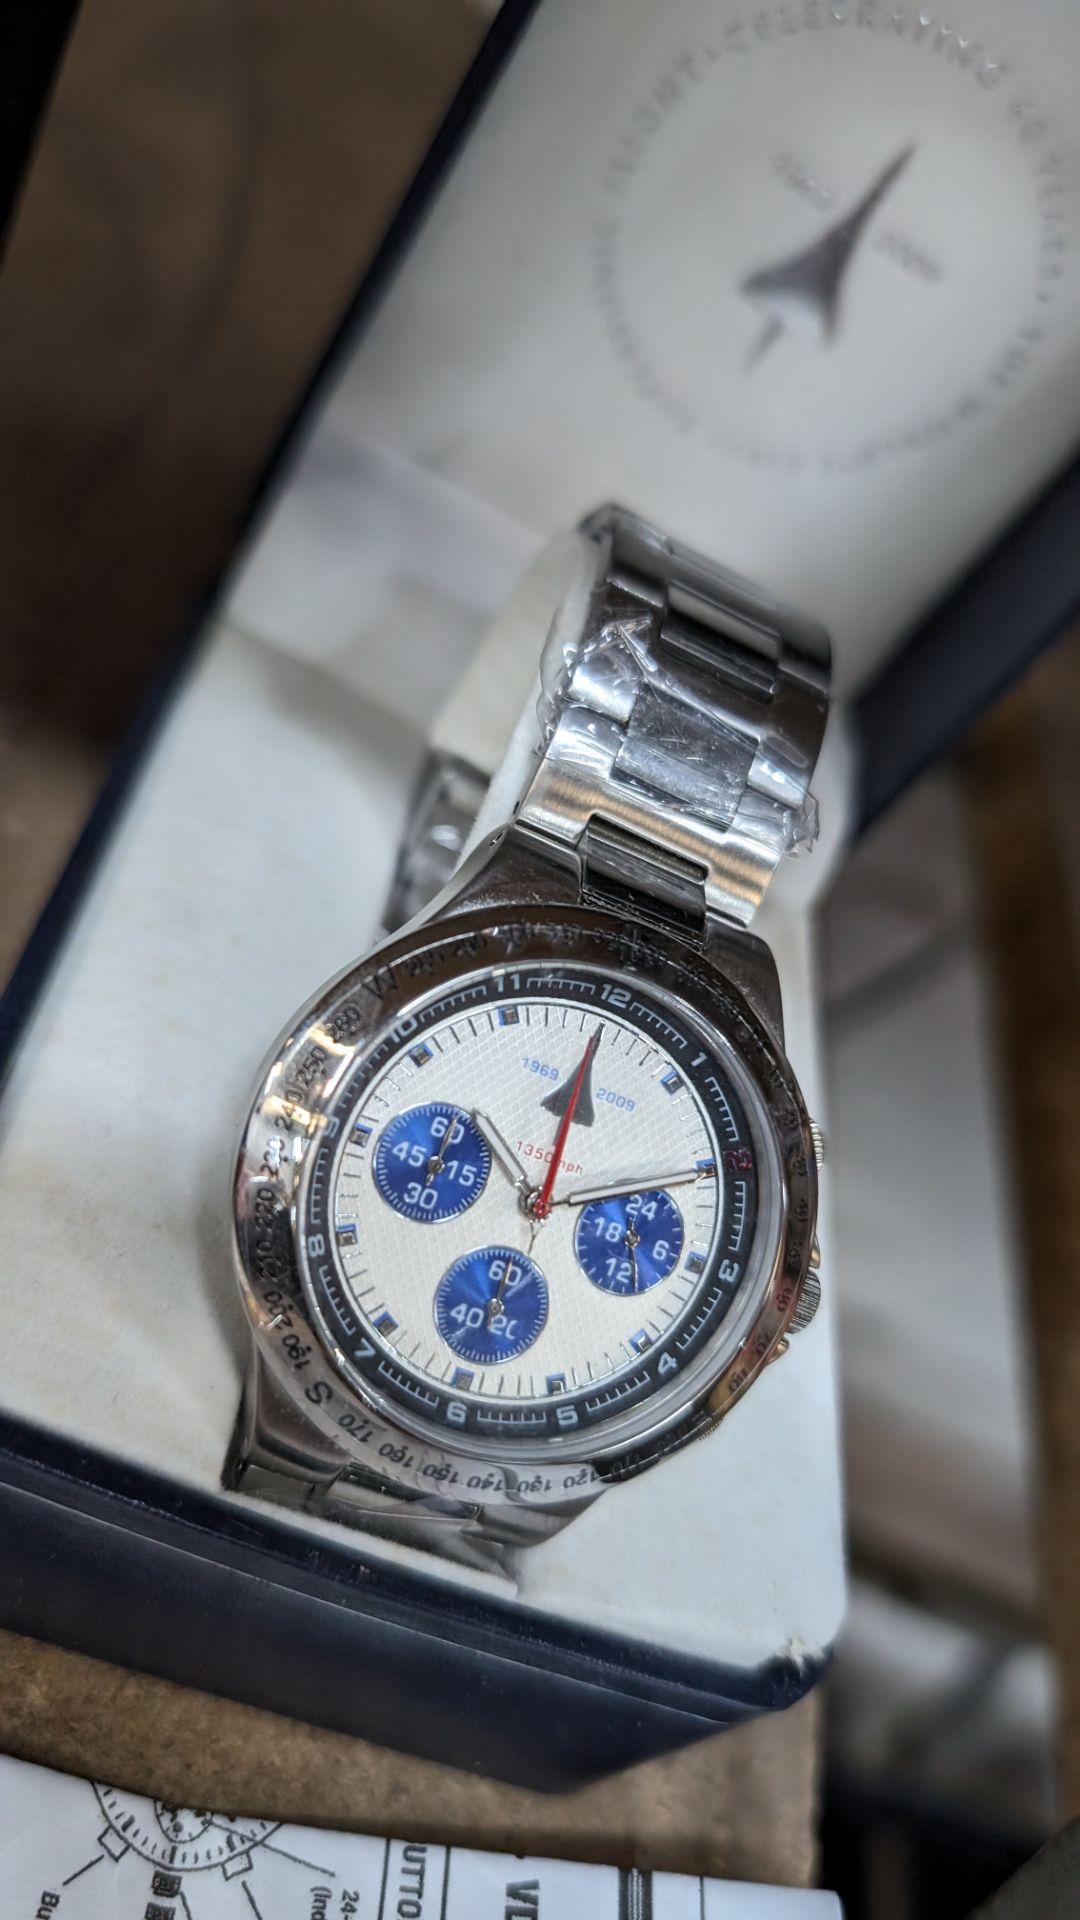 40th anniversary supersonic flight chronograph watch - Image 3 of 11